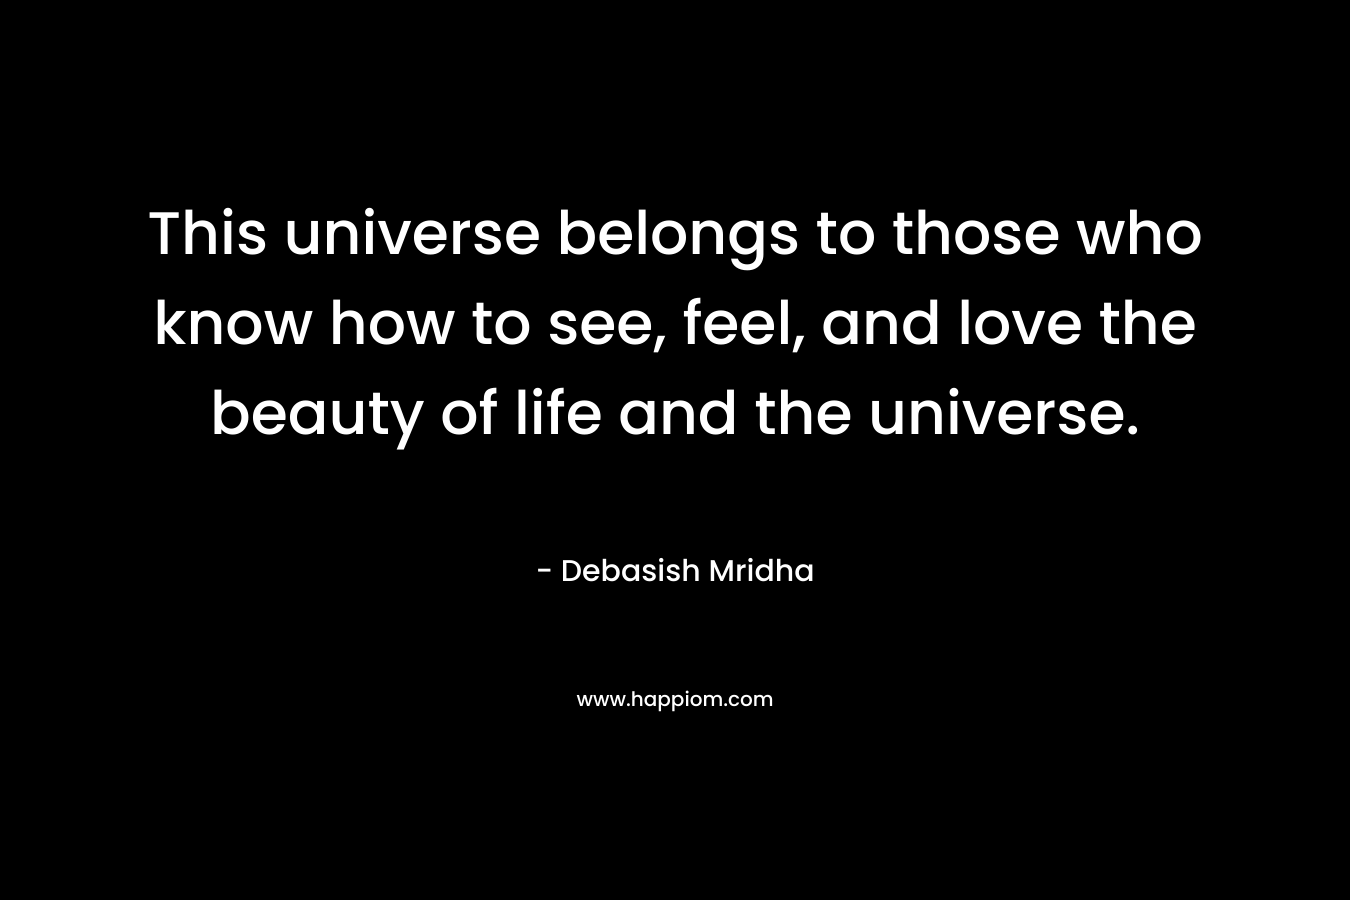 This universe belongs to those who know how to see, feel, and love the beauty of life and the universe.